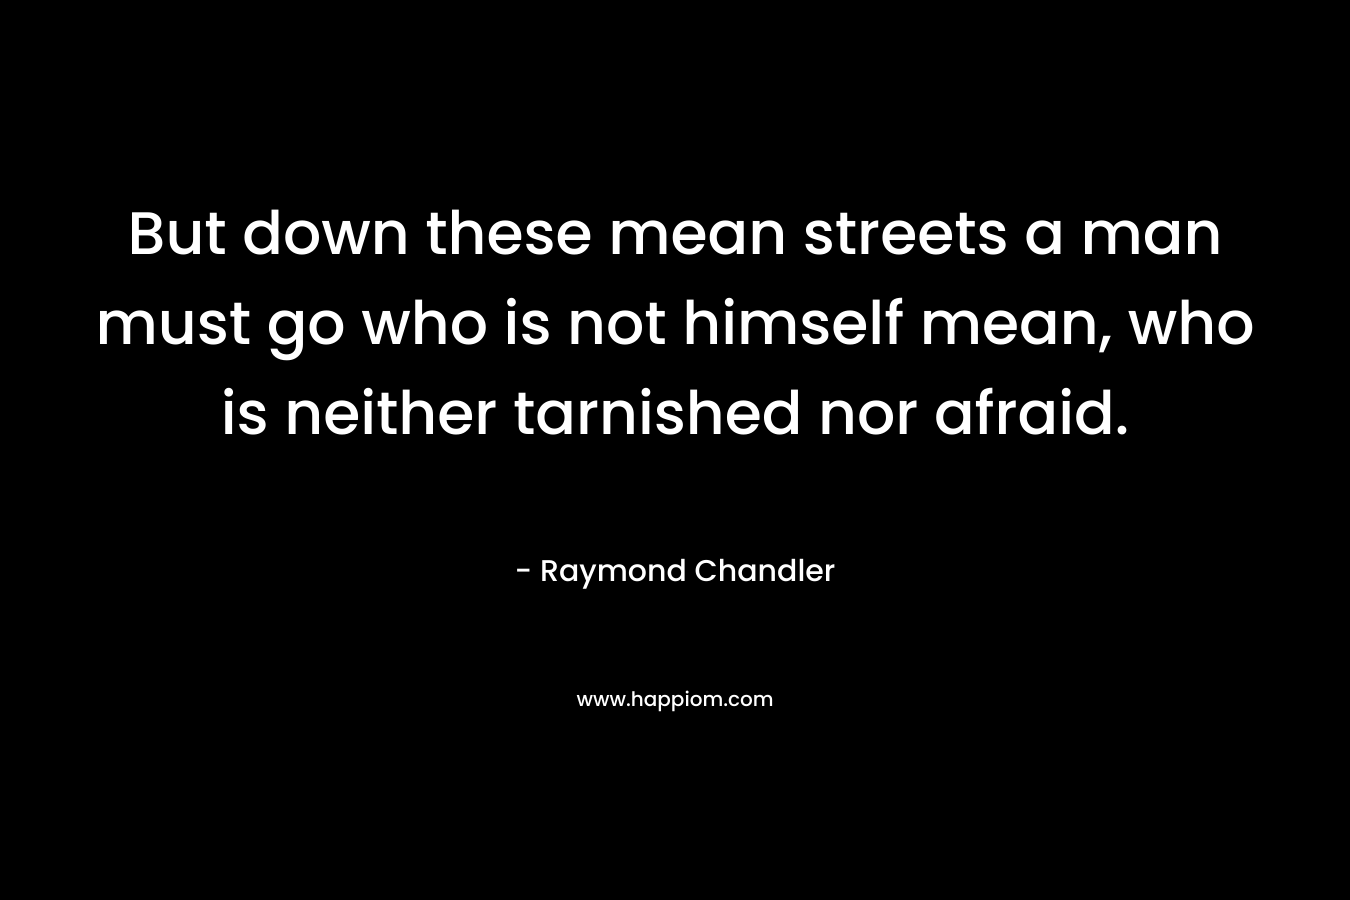 But down these mean streets a man must go who is not himself mean, who is neither tarnished nor afraid.